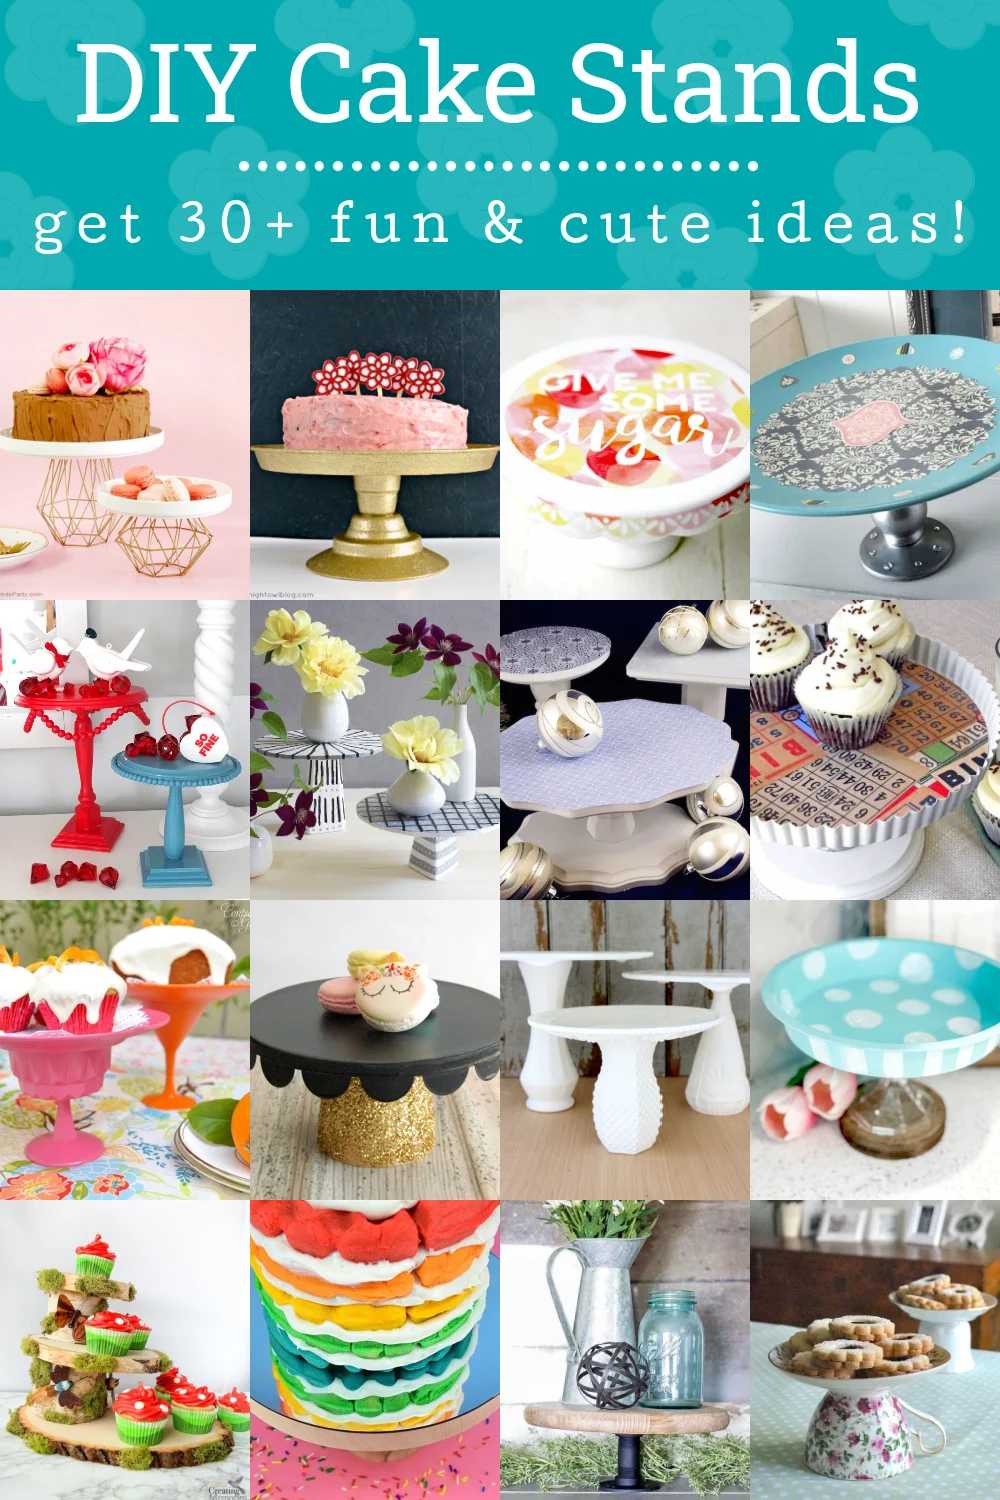 5 Ways to Make Your Own Tiered Cake Stand  Infarrantly Creative